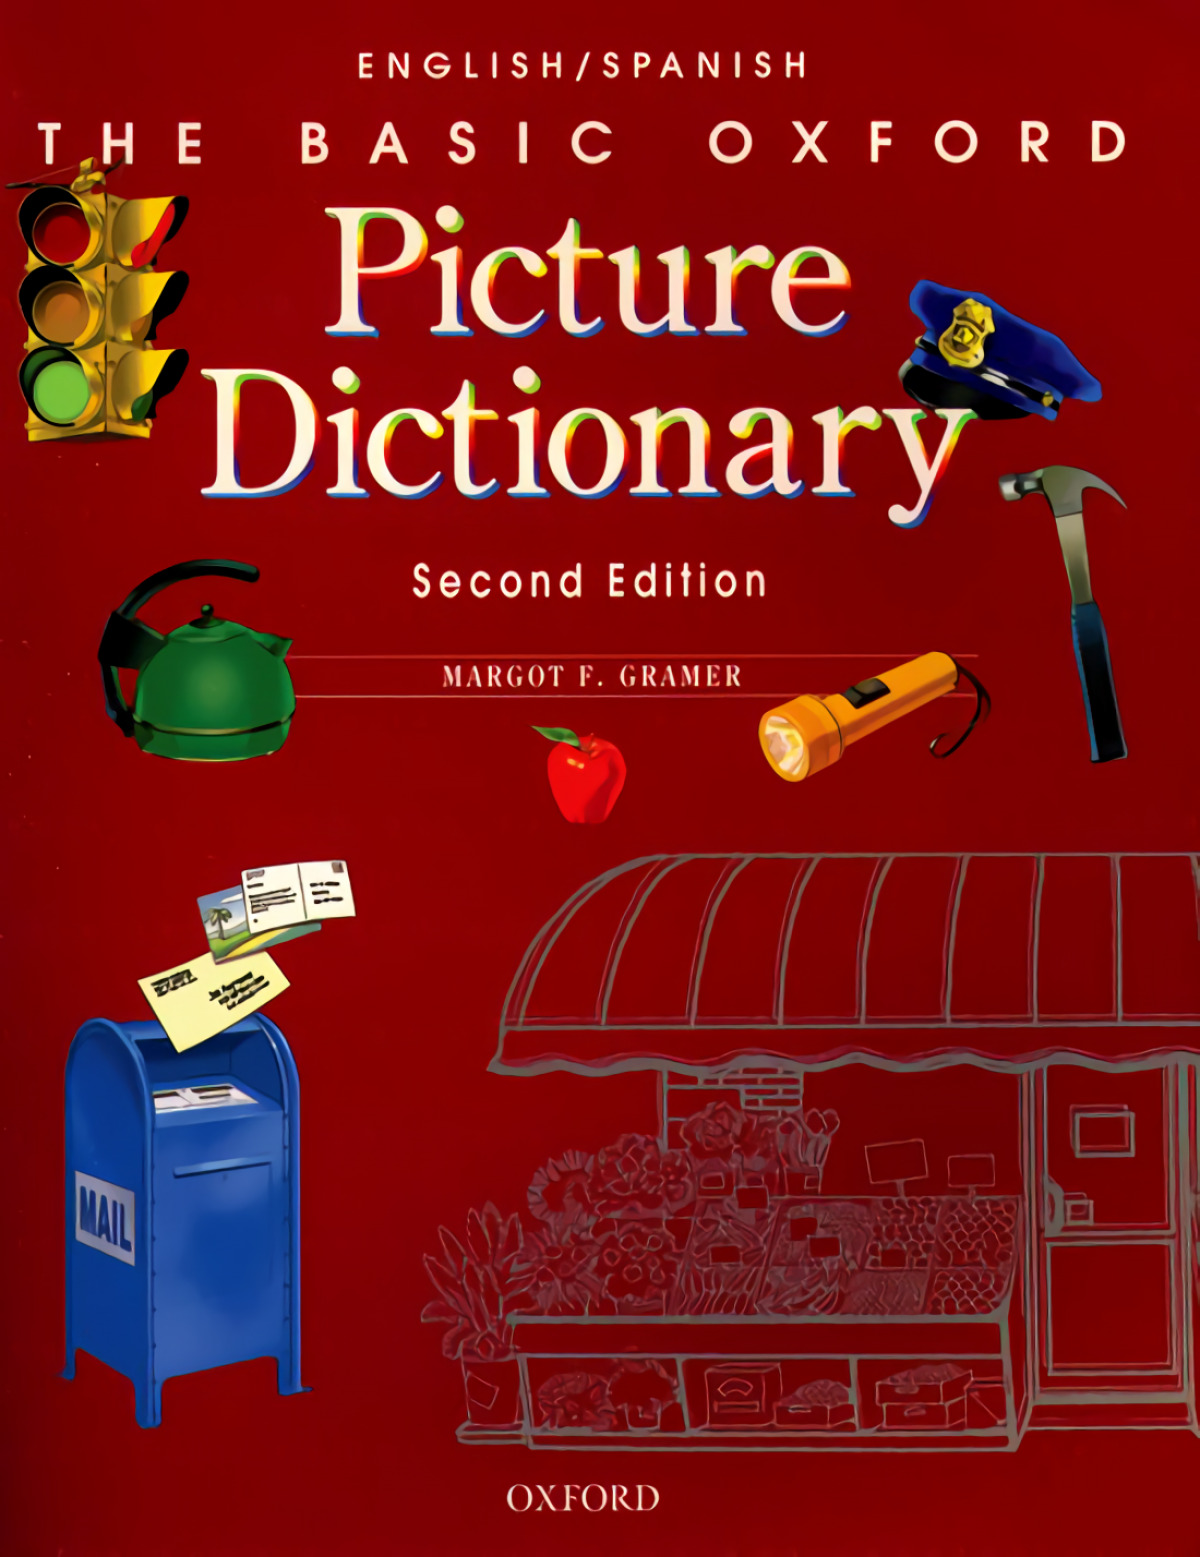 Basic Oxford Picture Dictionary: English/Spanish 2nd Edition - Gramer, Margot